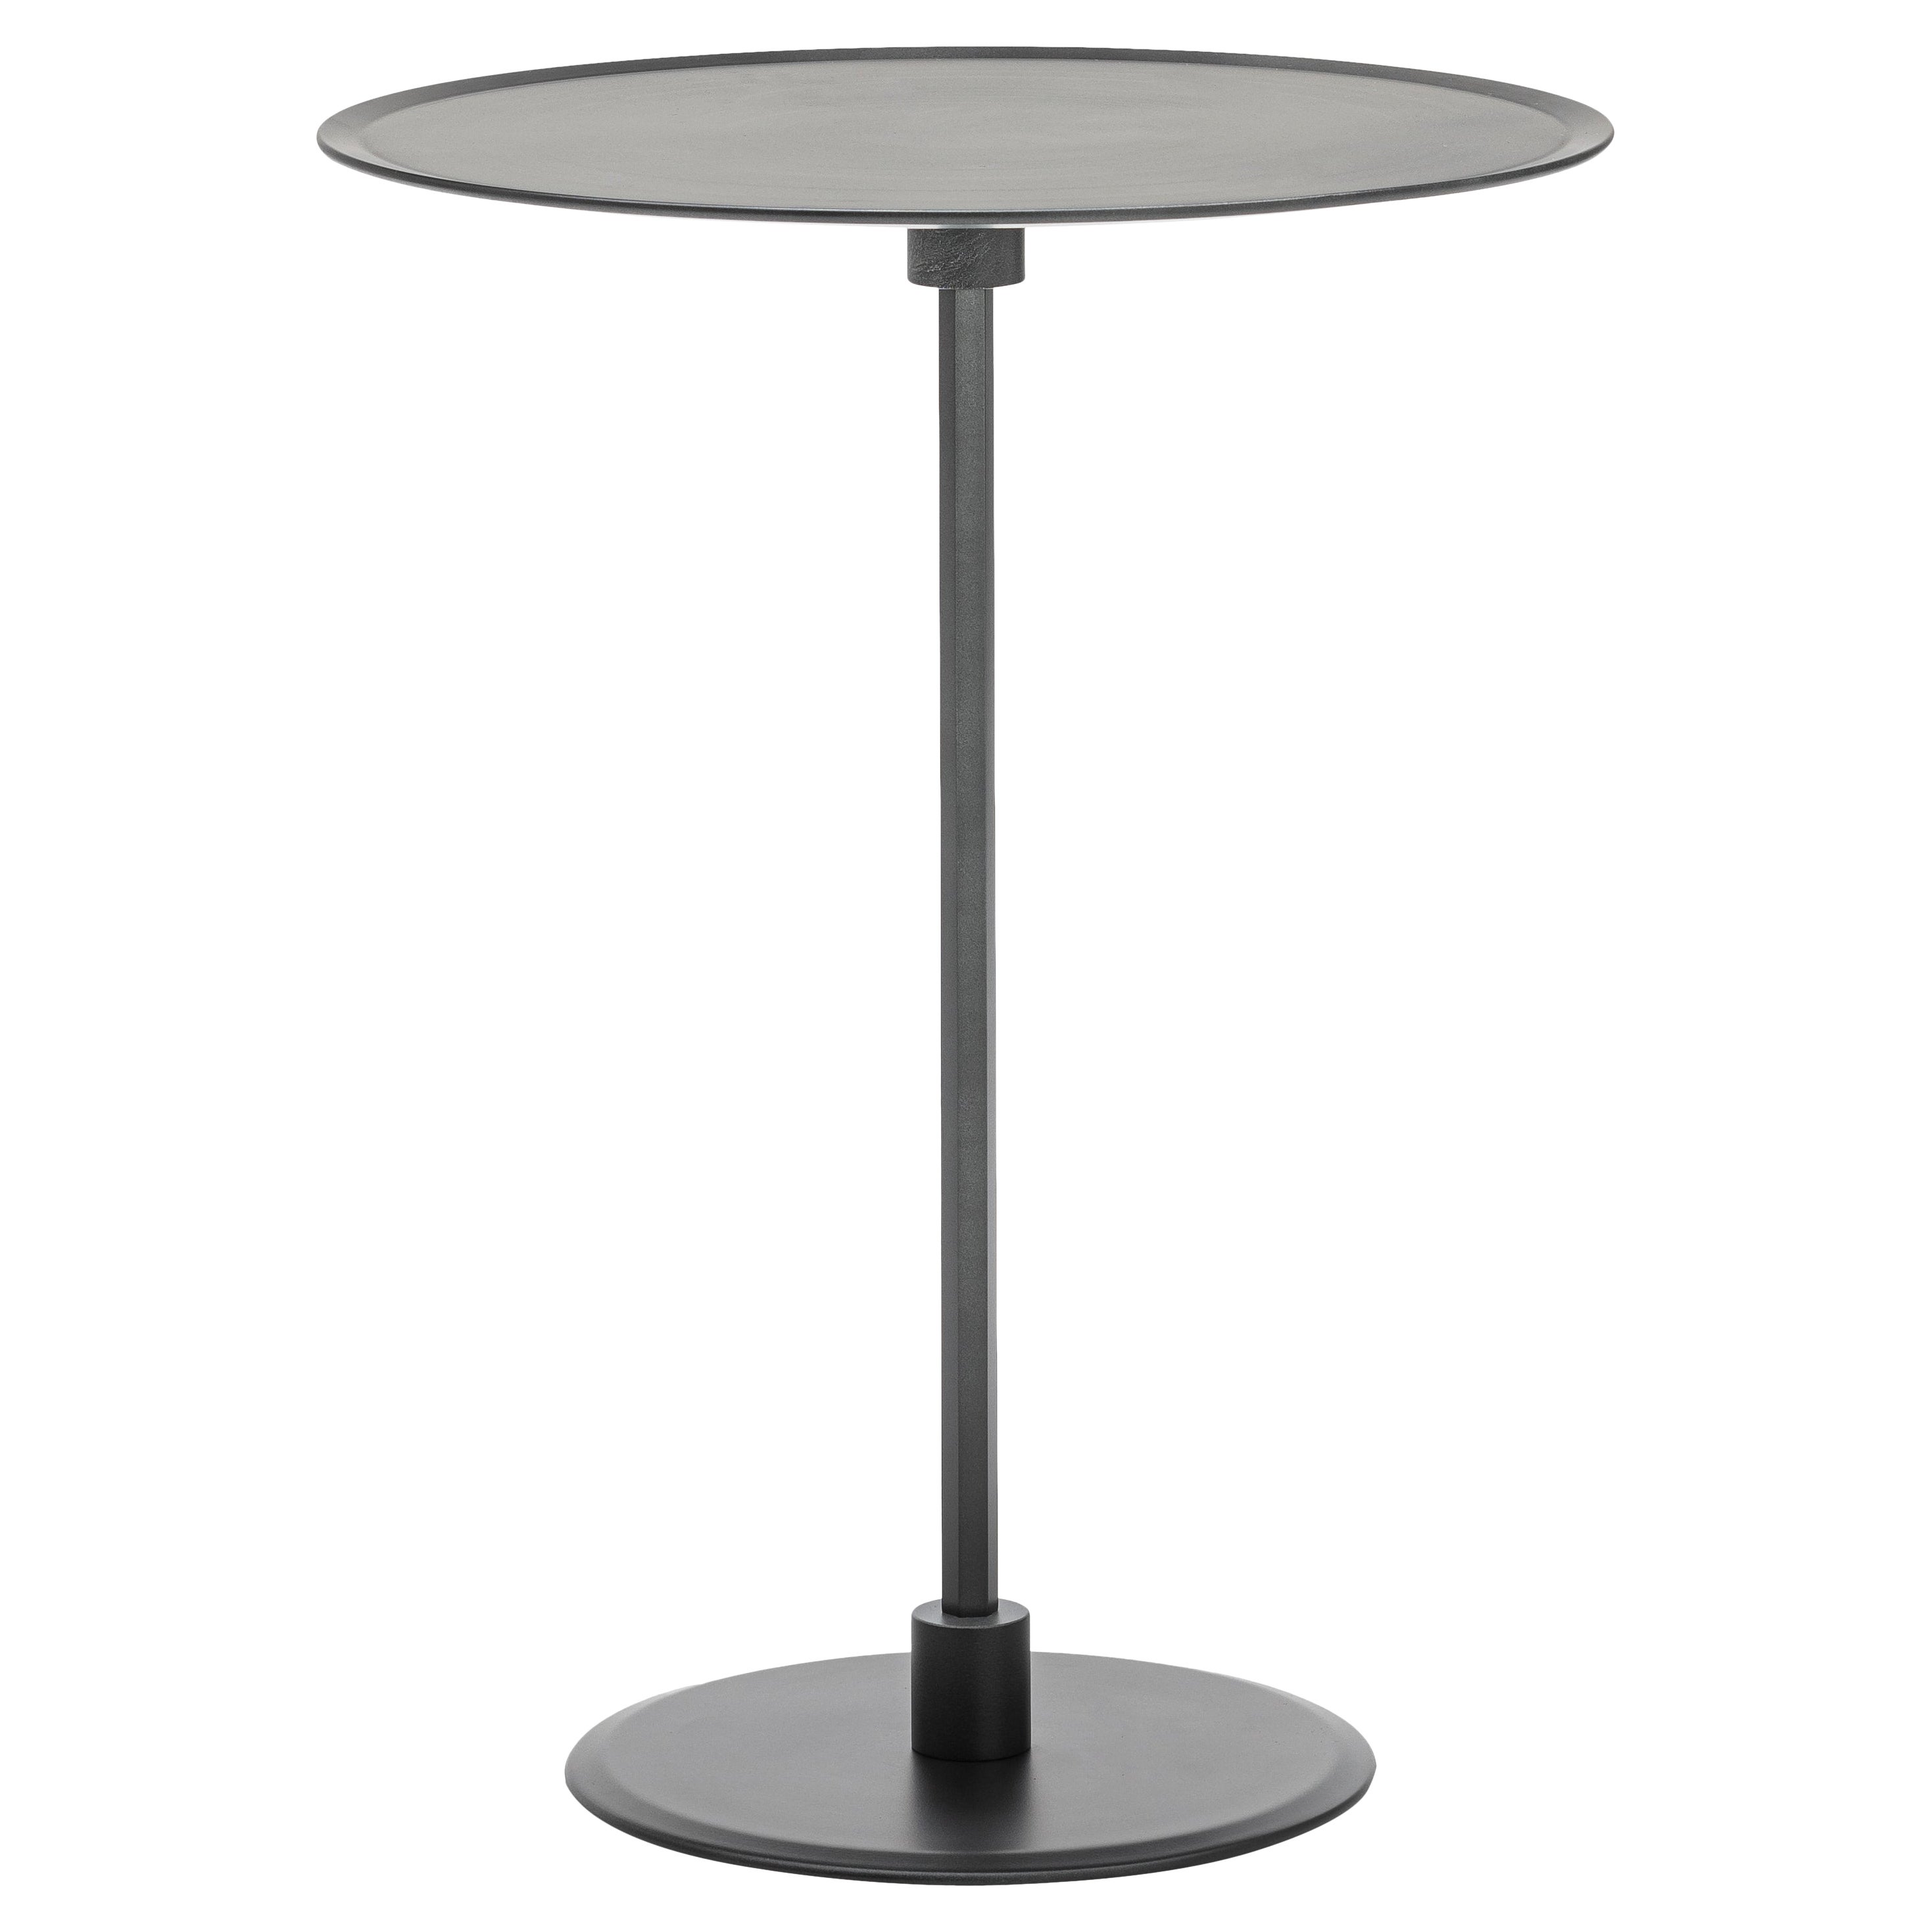 Acerbis Medium Gong Side Table in Matt Painted Gunmetal Top with Frame For Sale